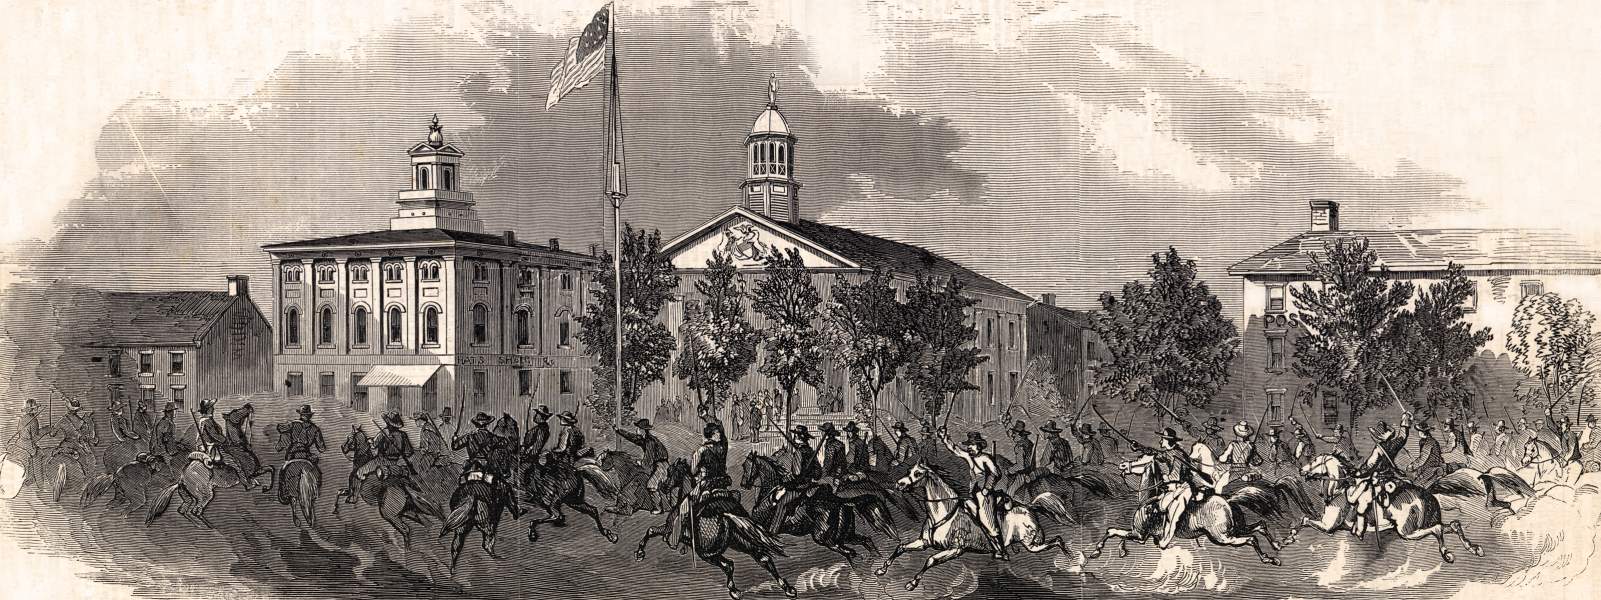 Confederate Cavalry in the Streets of Chambersburg, Pennsylvania, June 16, 1863, artist's impression, zoomable image